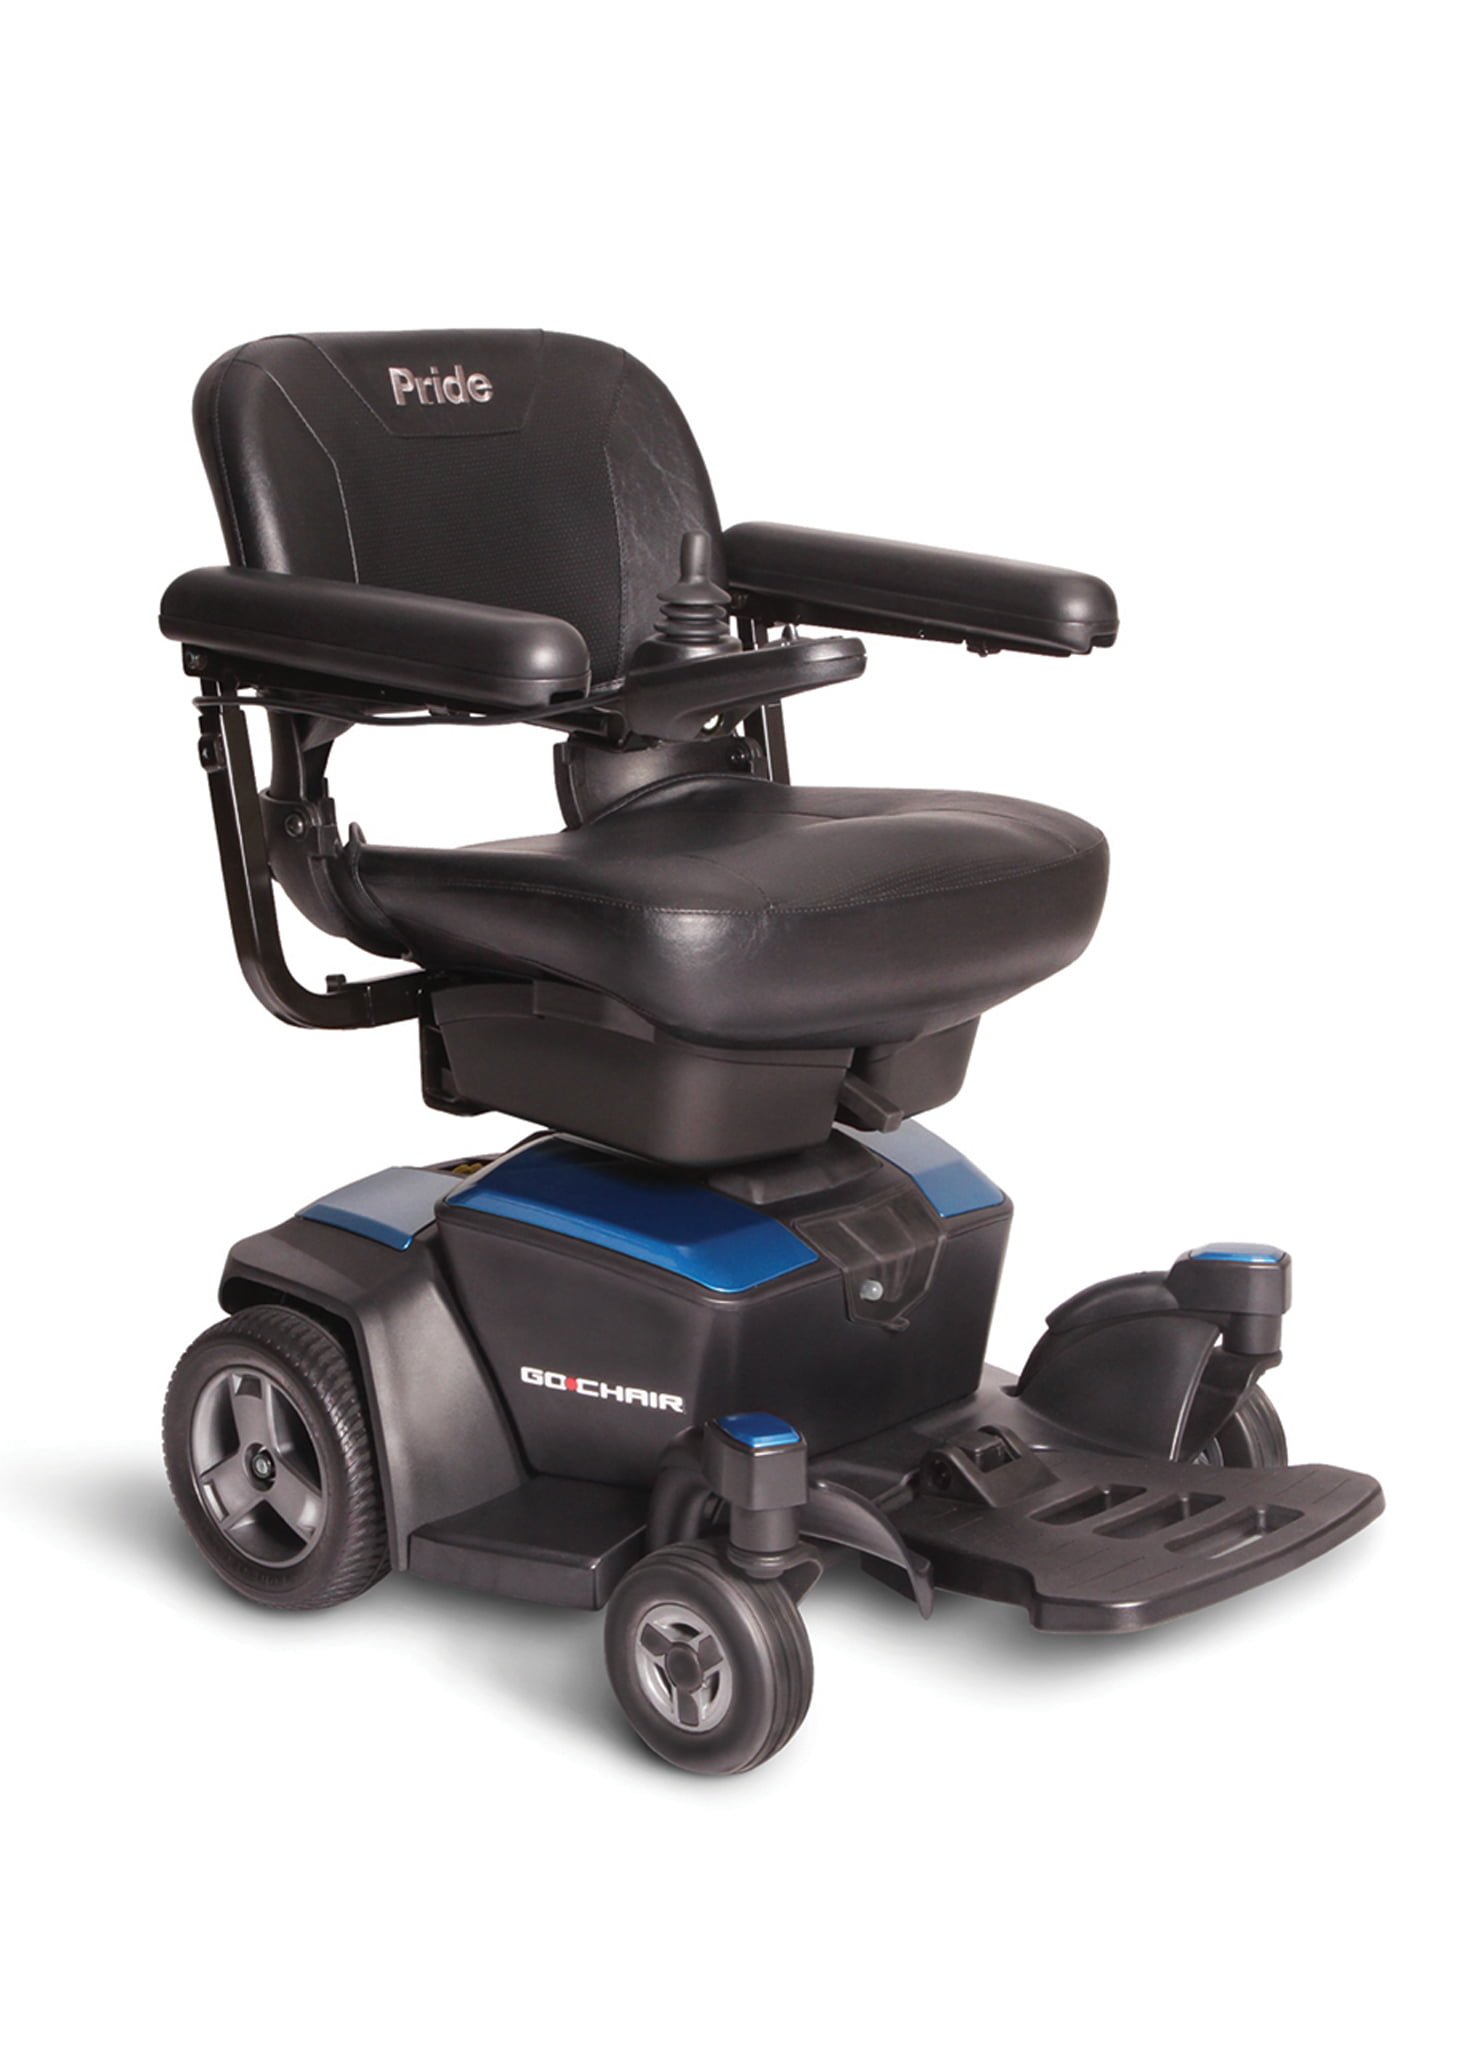 Pride Mobility Go Chair Powered Wheelchair